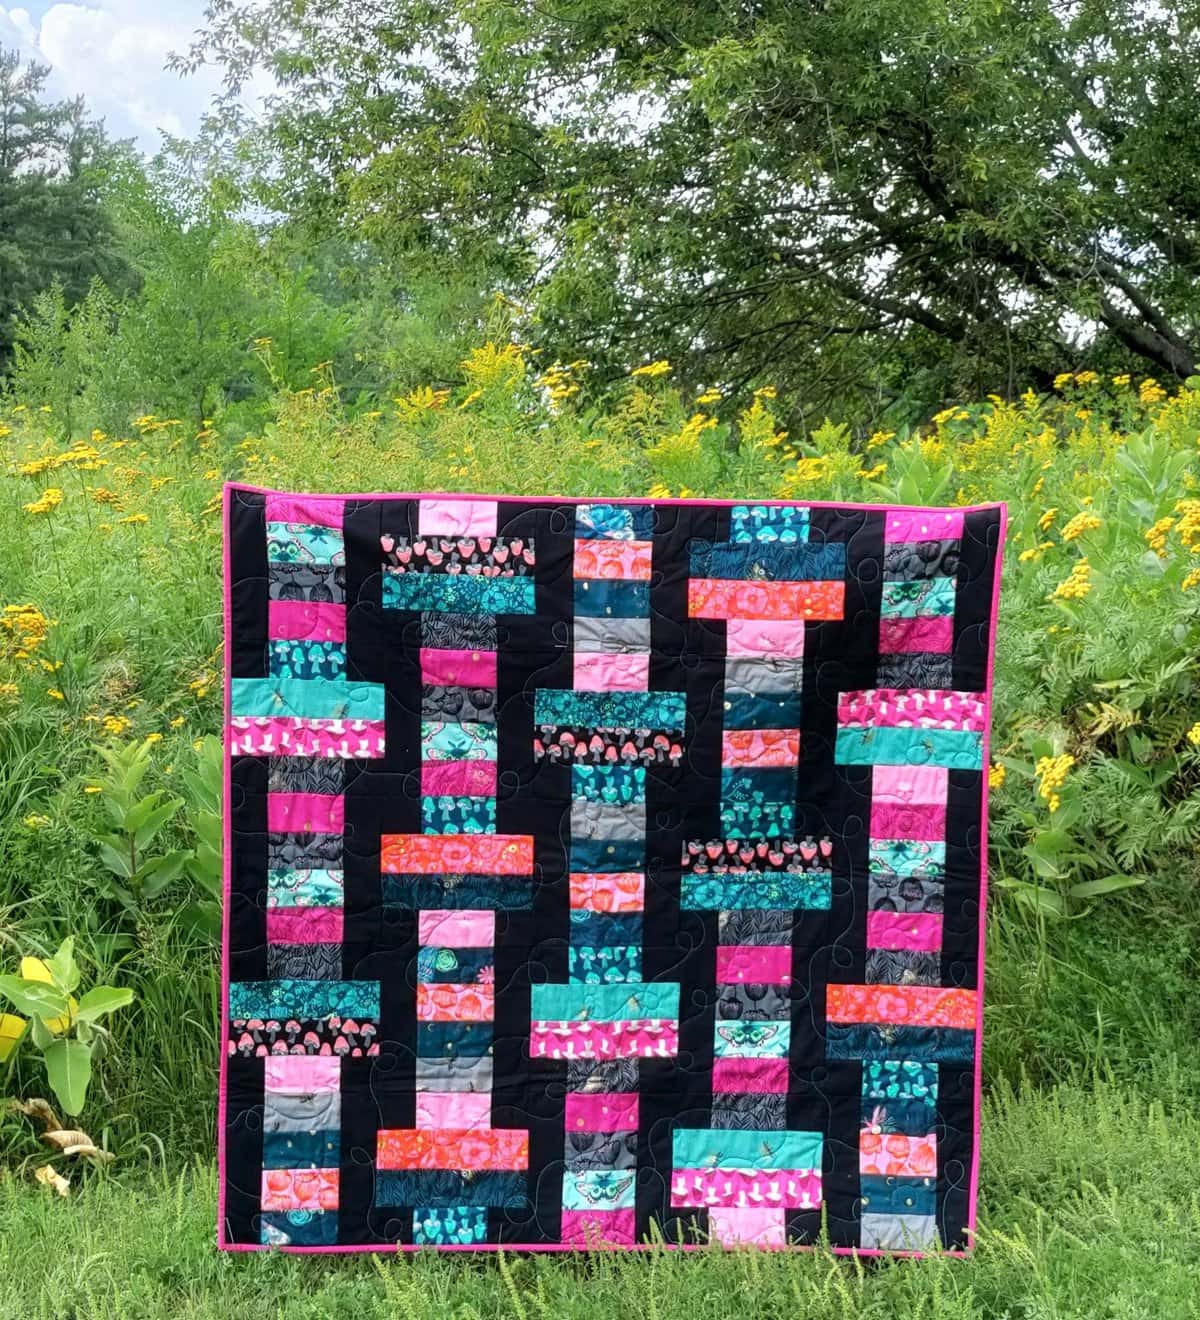 This Jelly Roll Slice quilt (right) was made by Laura Piland of Slice of Pi Quilts with Firefly by Sarah Watts for Ruby Star Society.